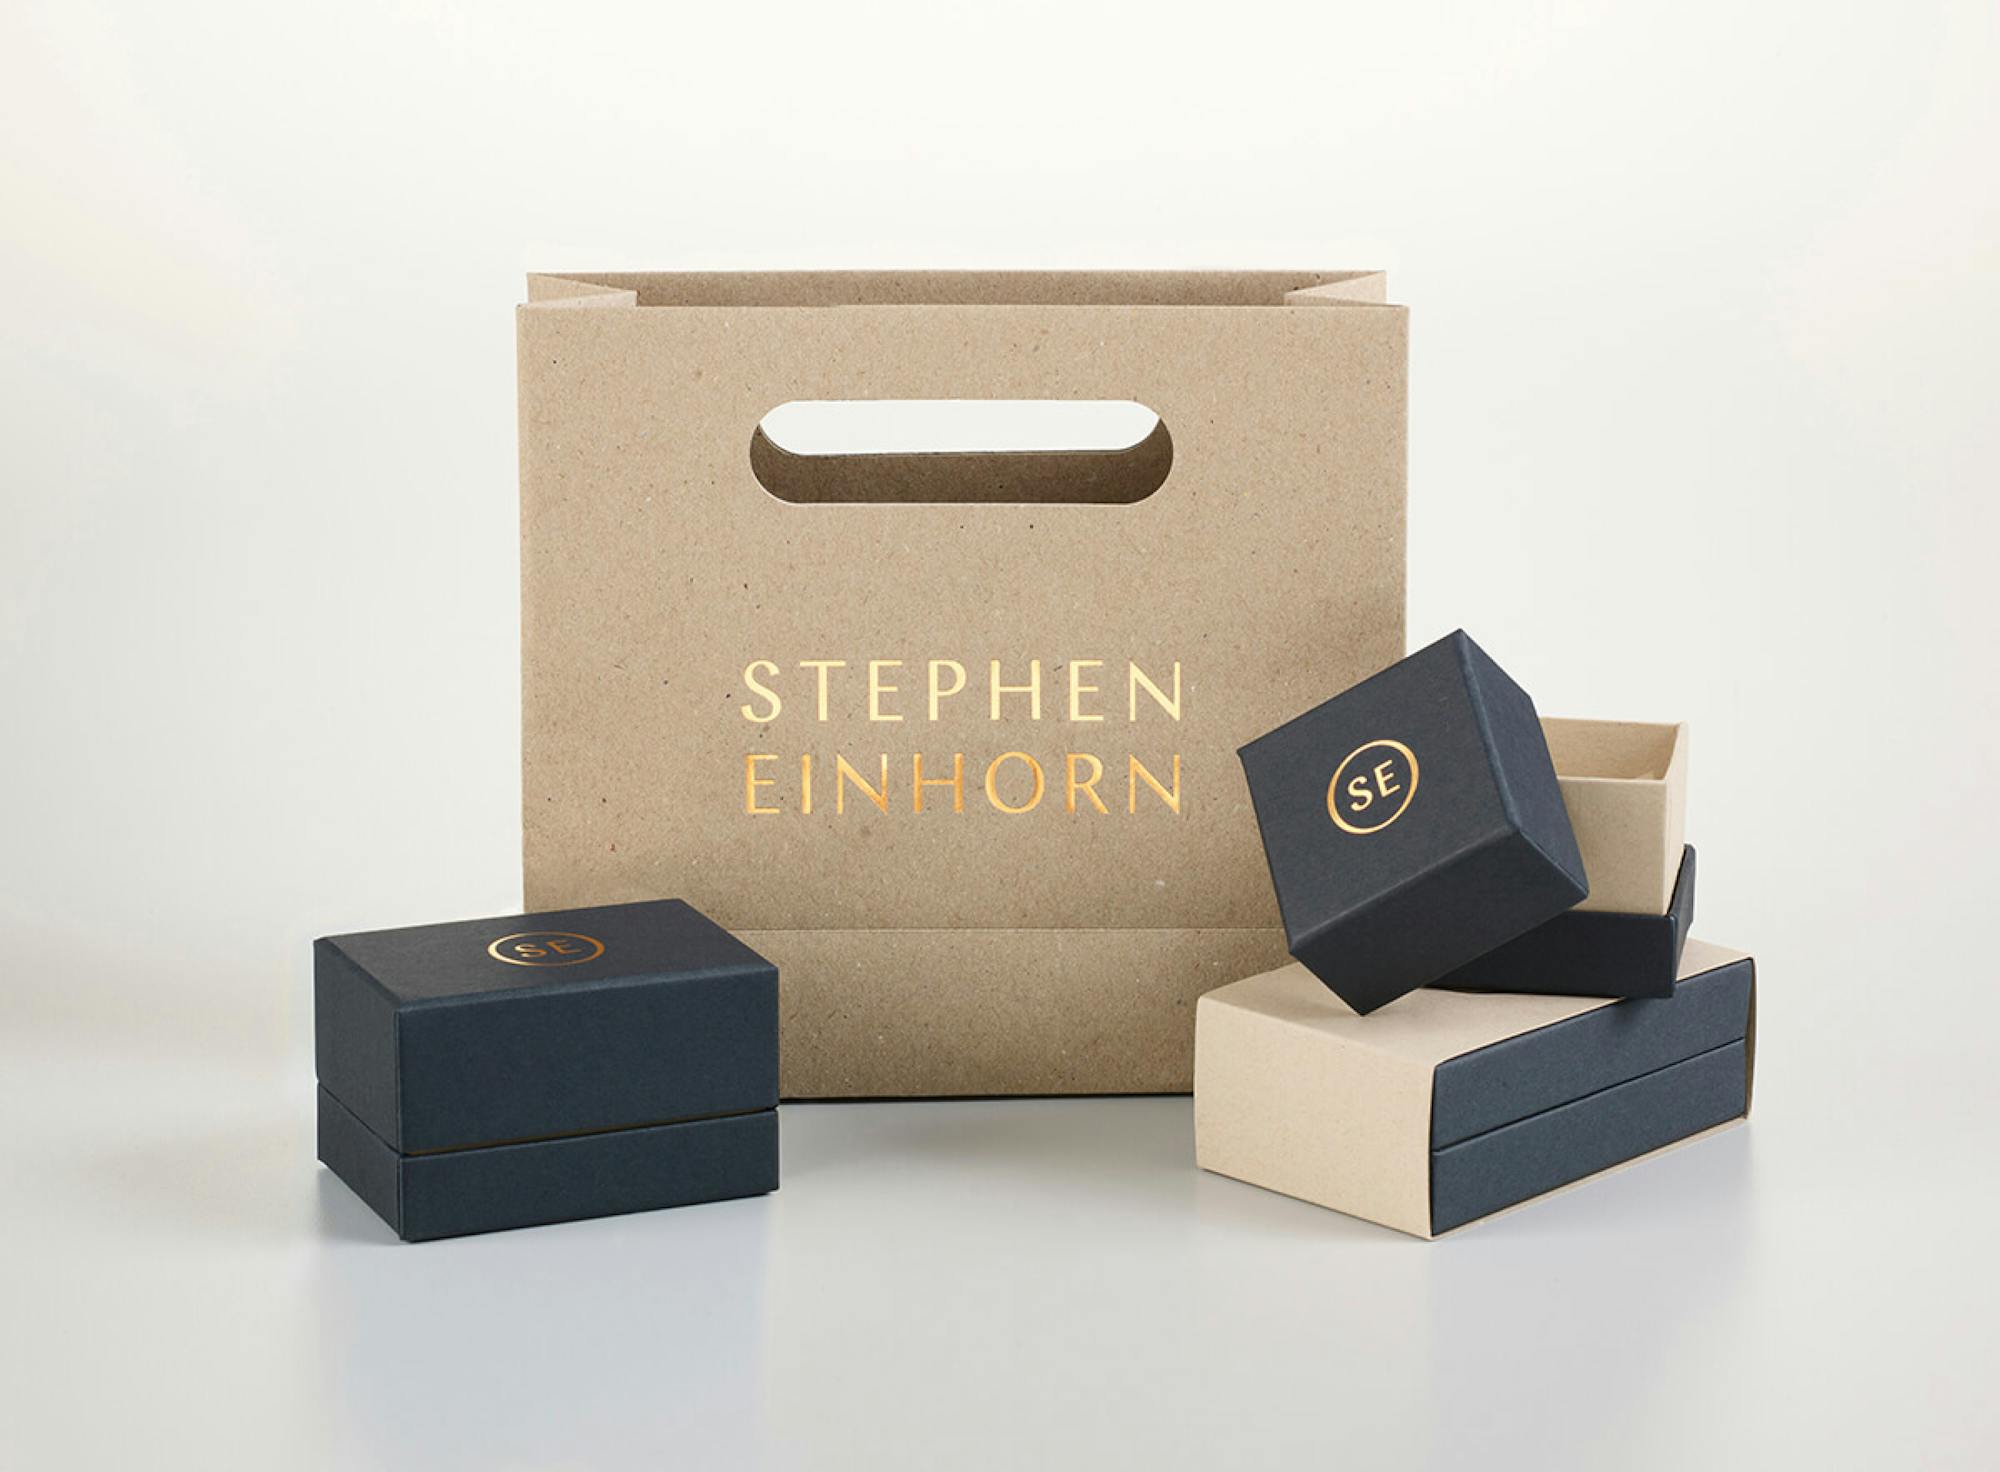 Sustainability A closer look at Stephen Einhorn's new, sustainably-minded packaging 